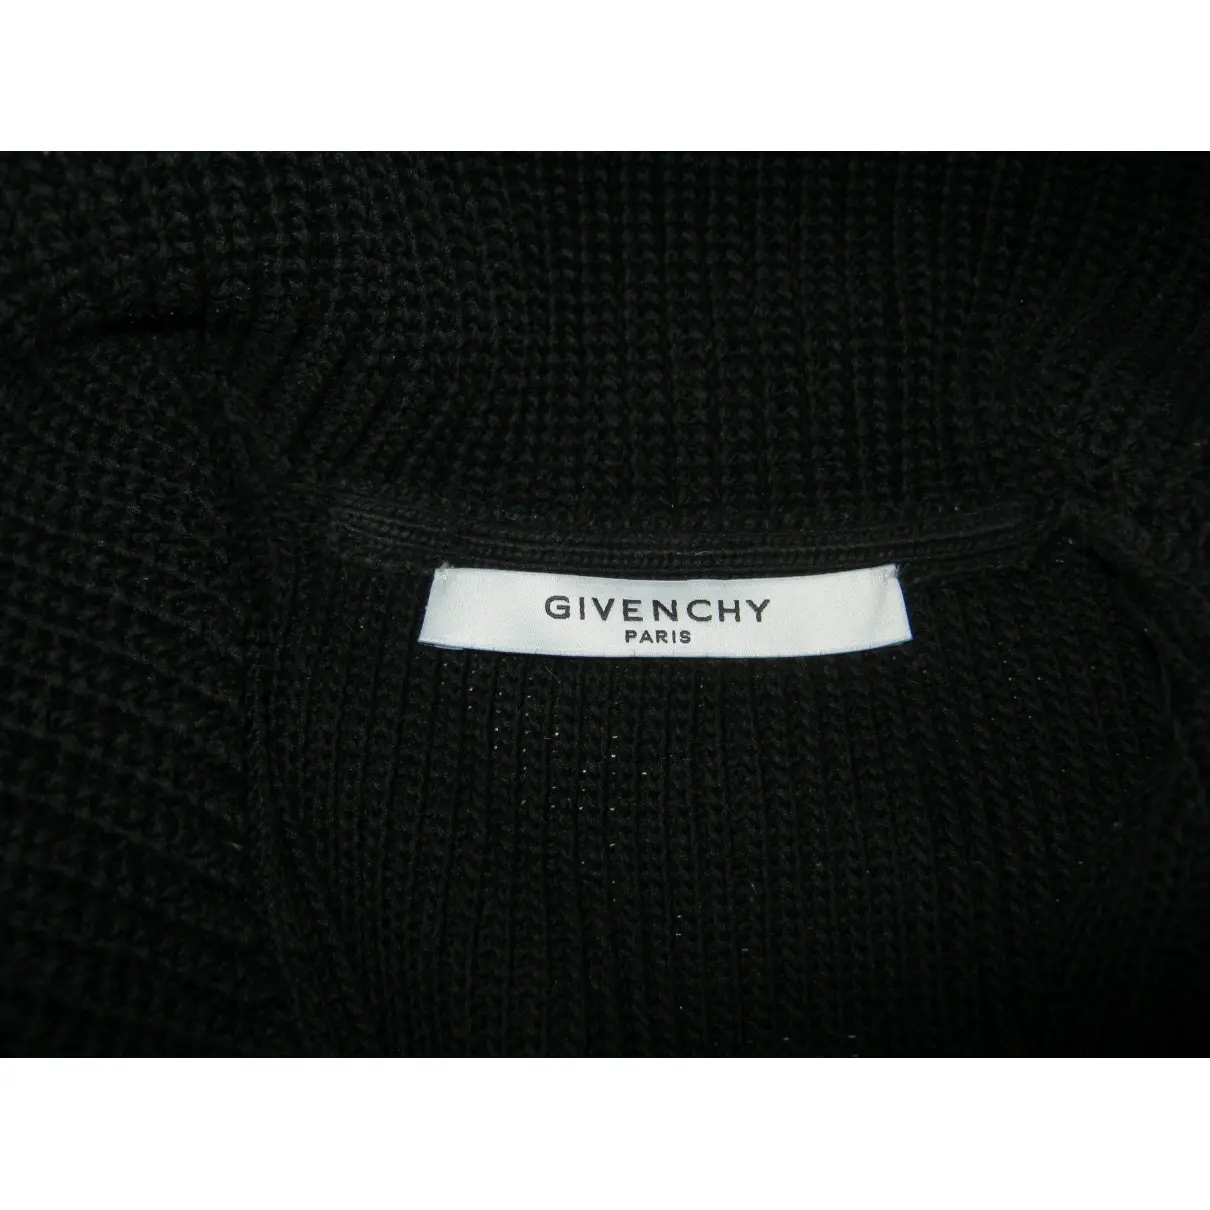 Buy Givenchy Cardigan online